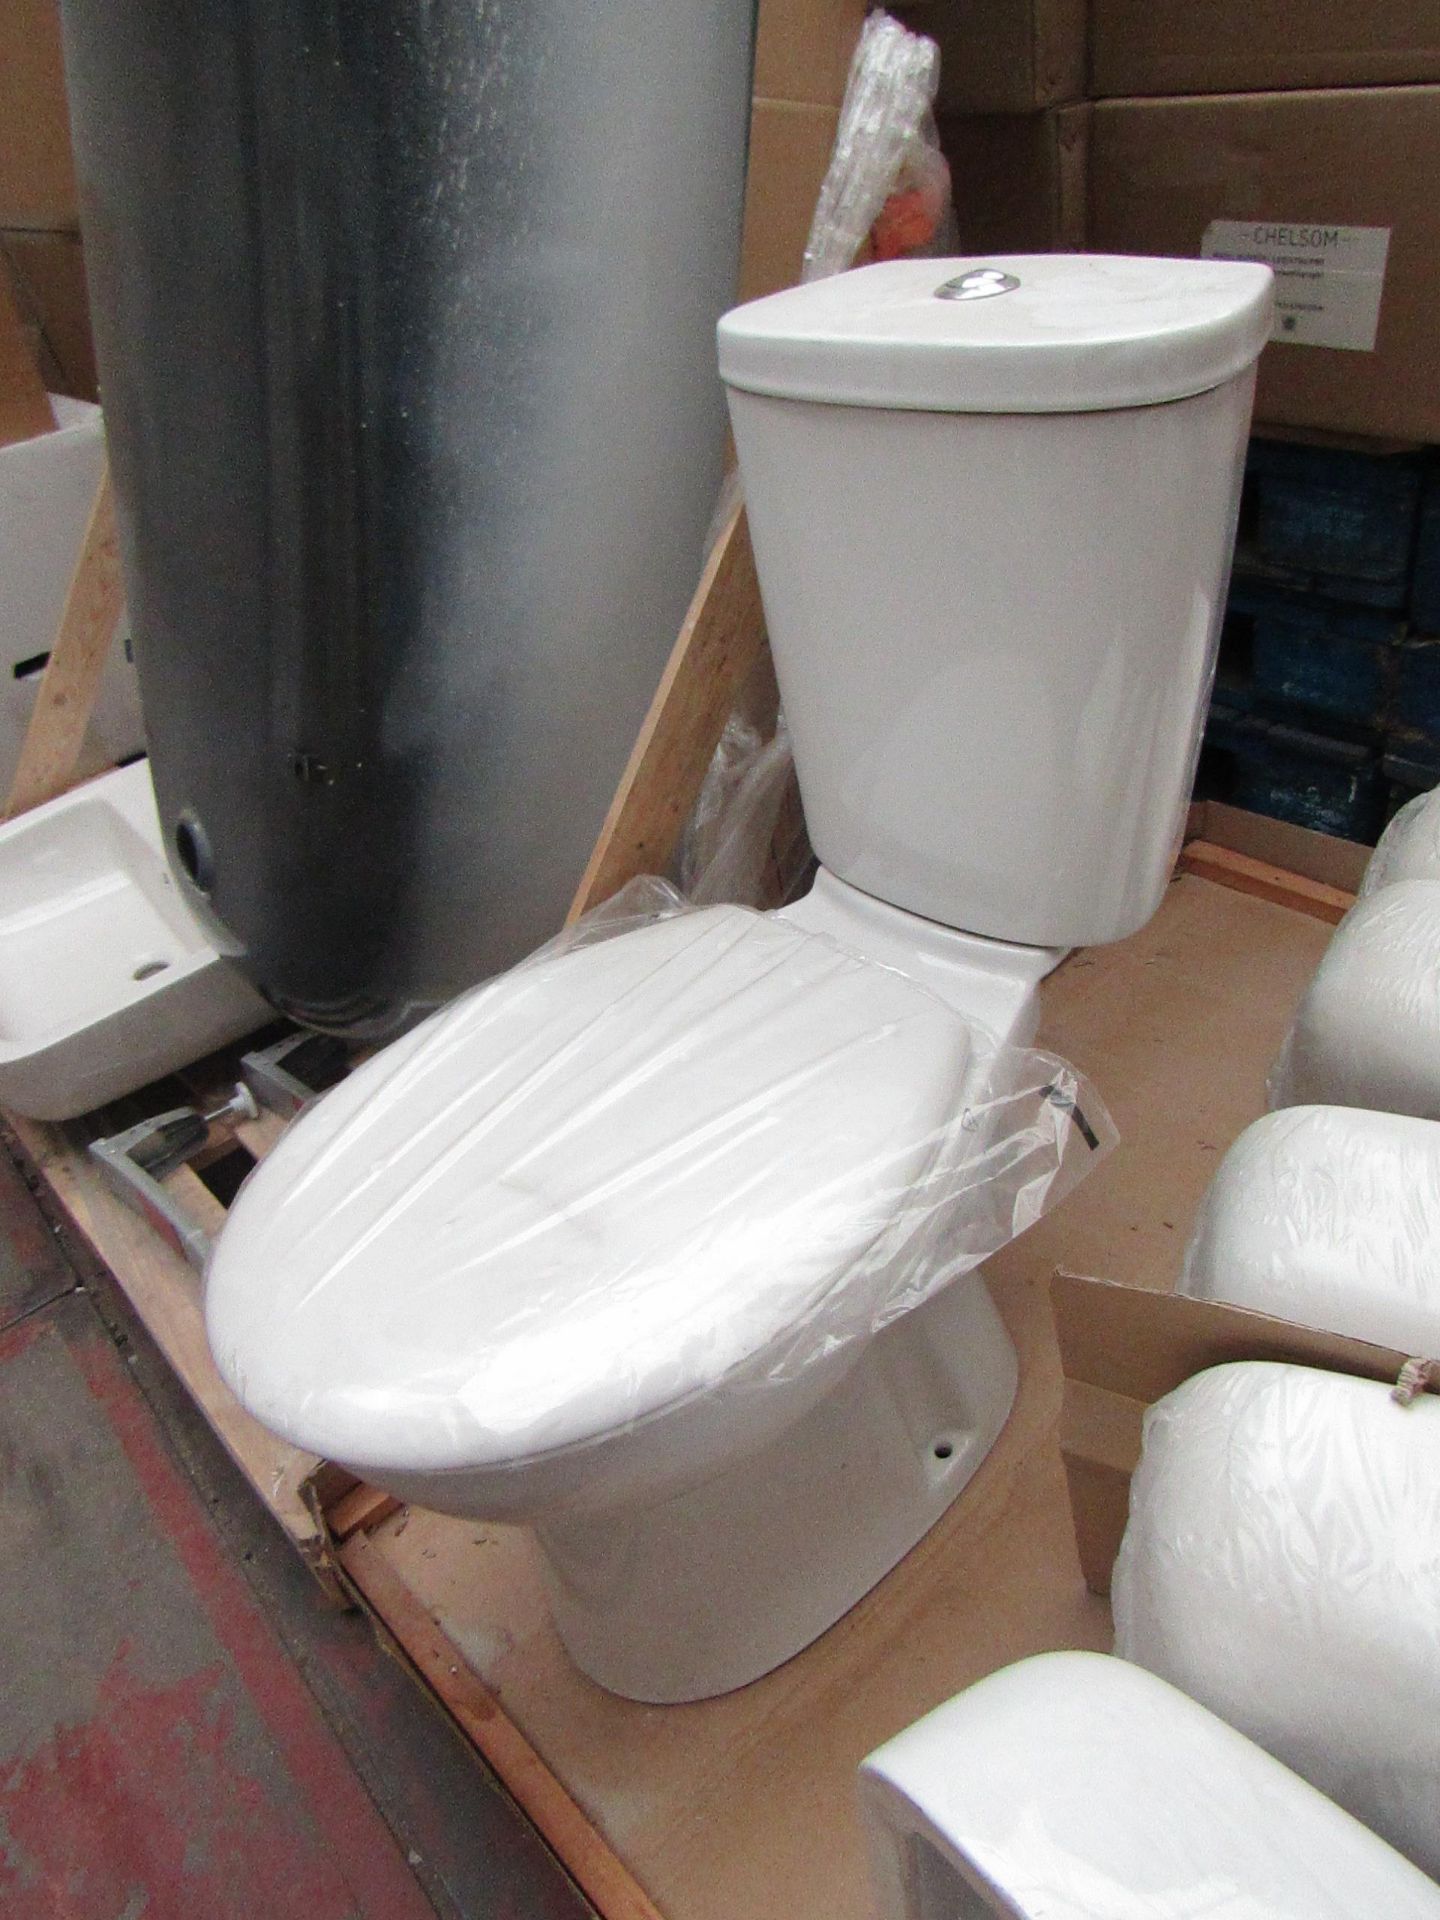 Unbranded Roca Close Coupled toilet comes complete with Cistern, Flush system, toilet pan and